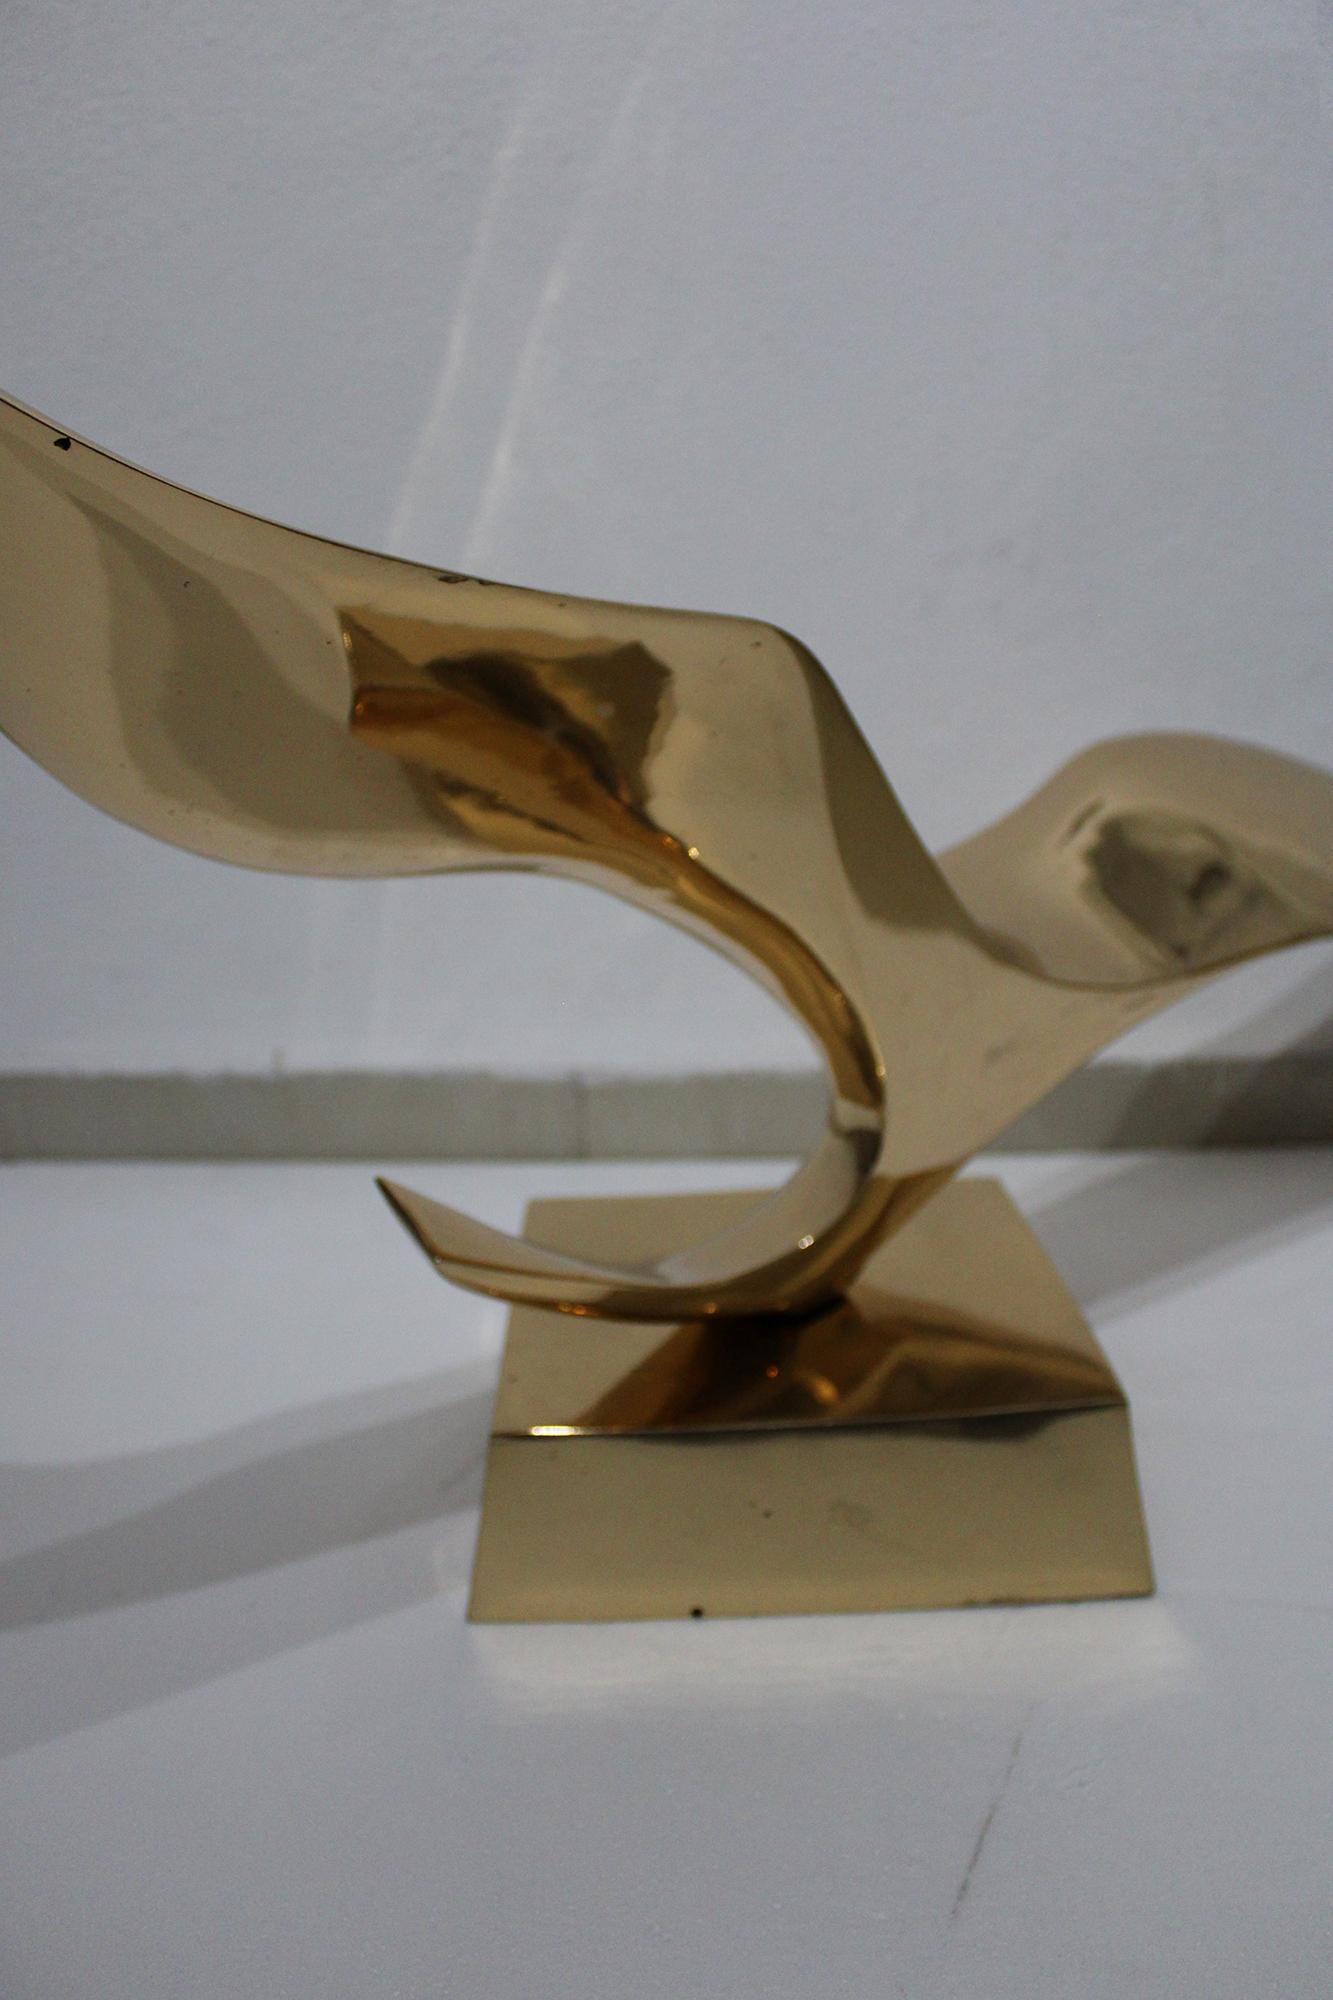 Artist: Leonardo Nierman
Title: Bird in Flight
Medium: Bronze Sculpture
Inscription: Etched signature and edition number
Edition: From the limited edition of 6, I/VI